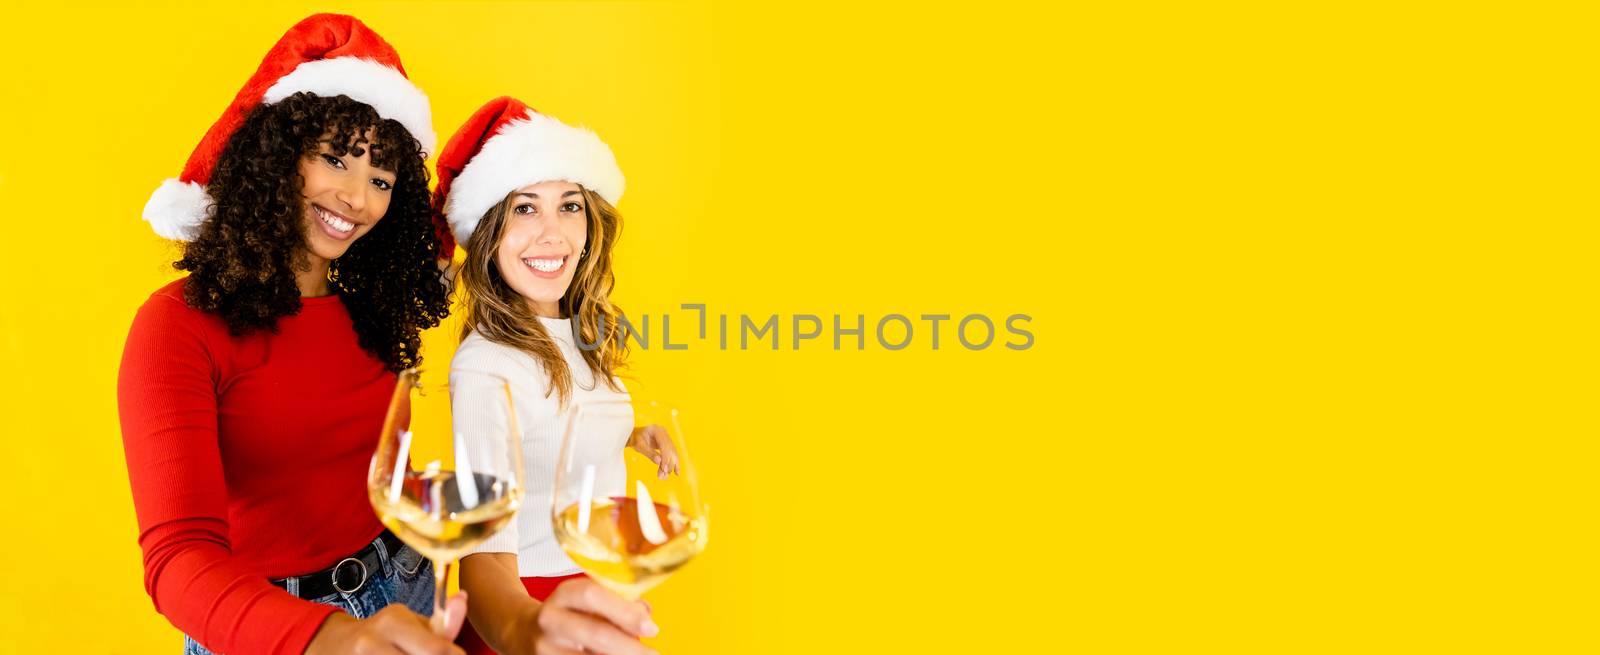 Toasting to Christmas together regardless of diversity - Two women, black Hispanic and Caucasian wearing Santa hat, looking at the camera holding a glass of white wine on big yellow copy space